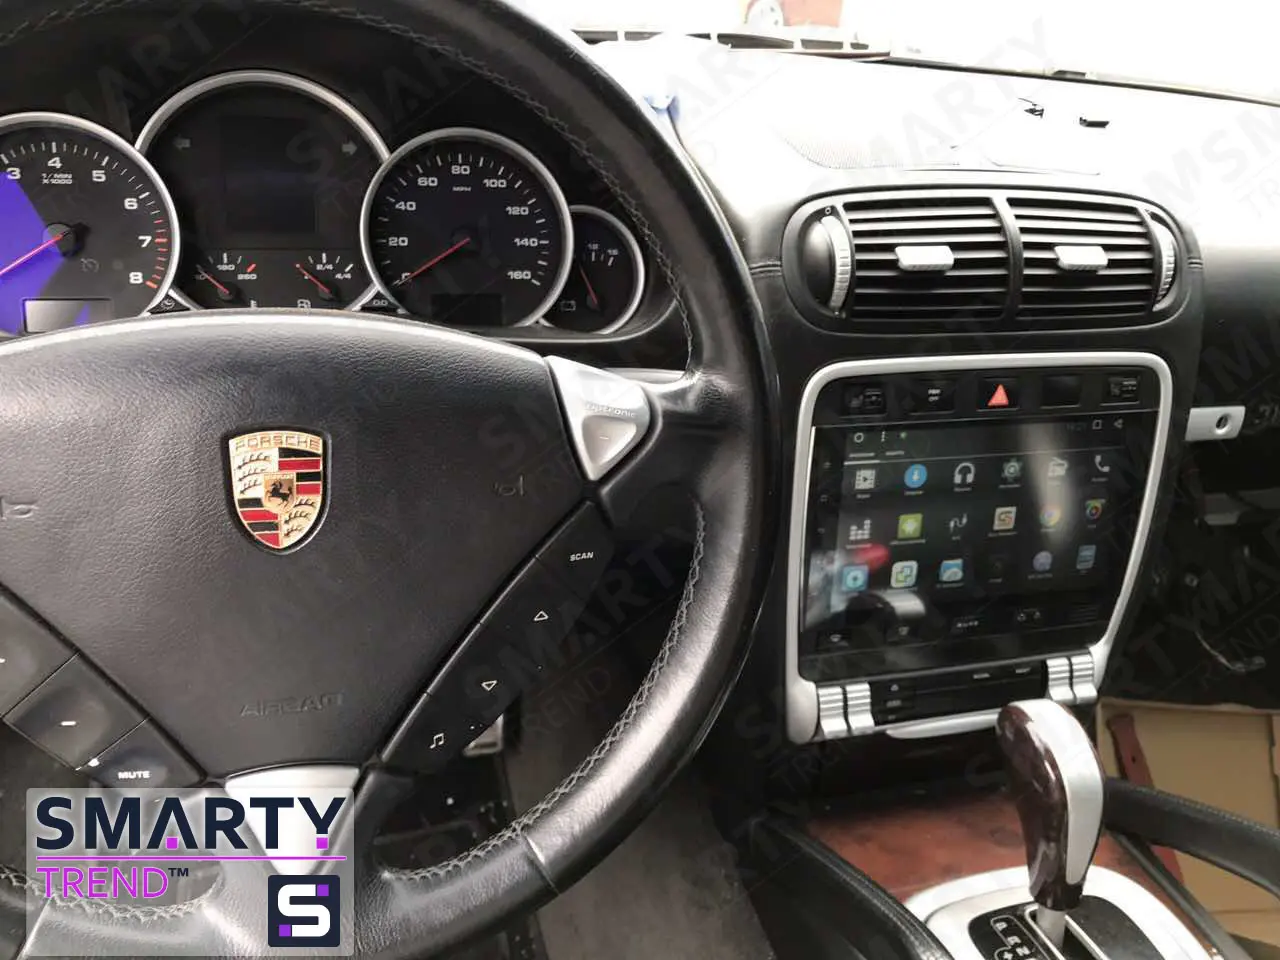 The SMARTY Trend head unit for Porsche Cayenne. 